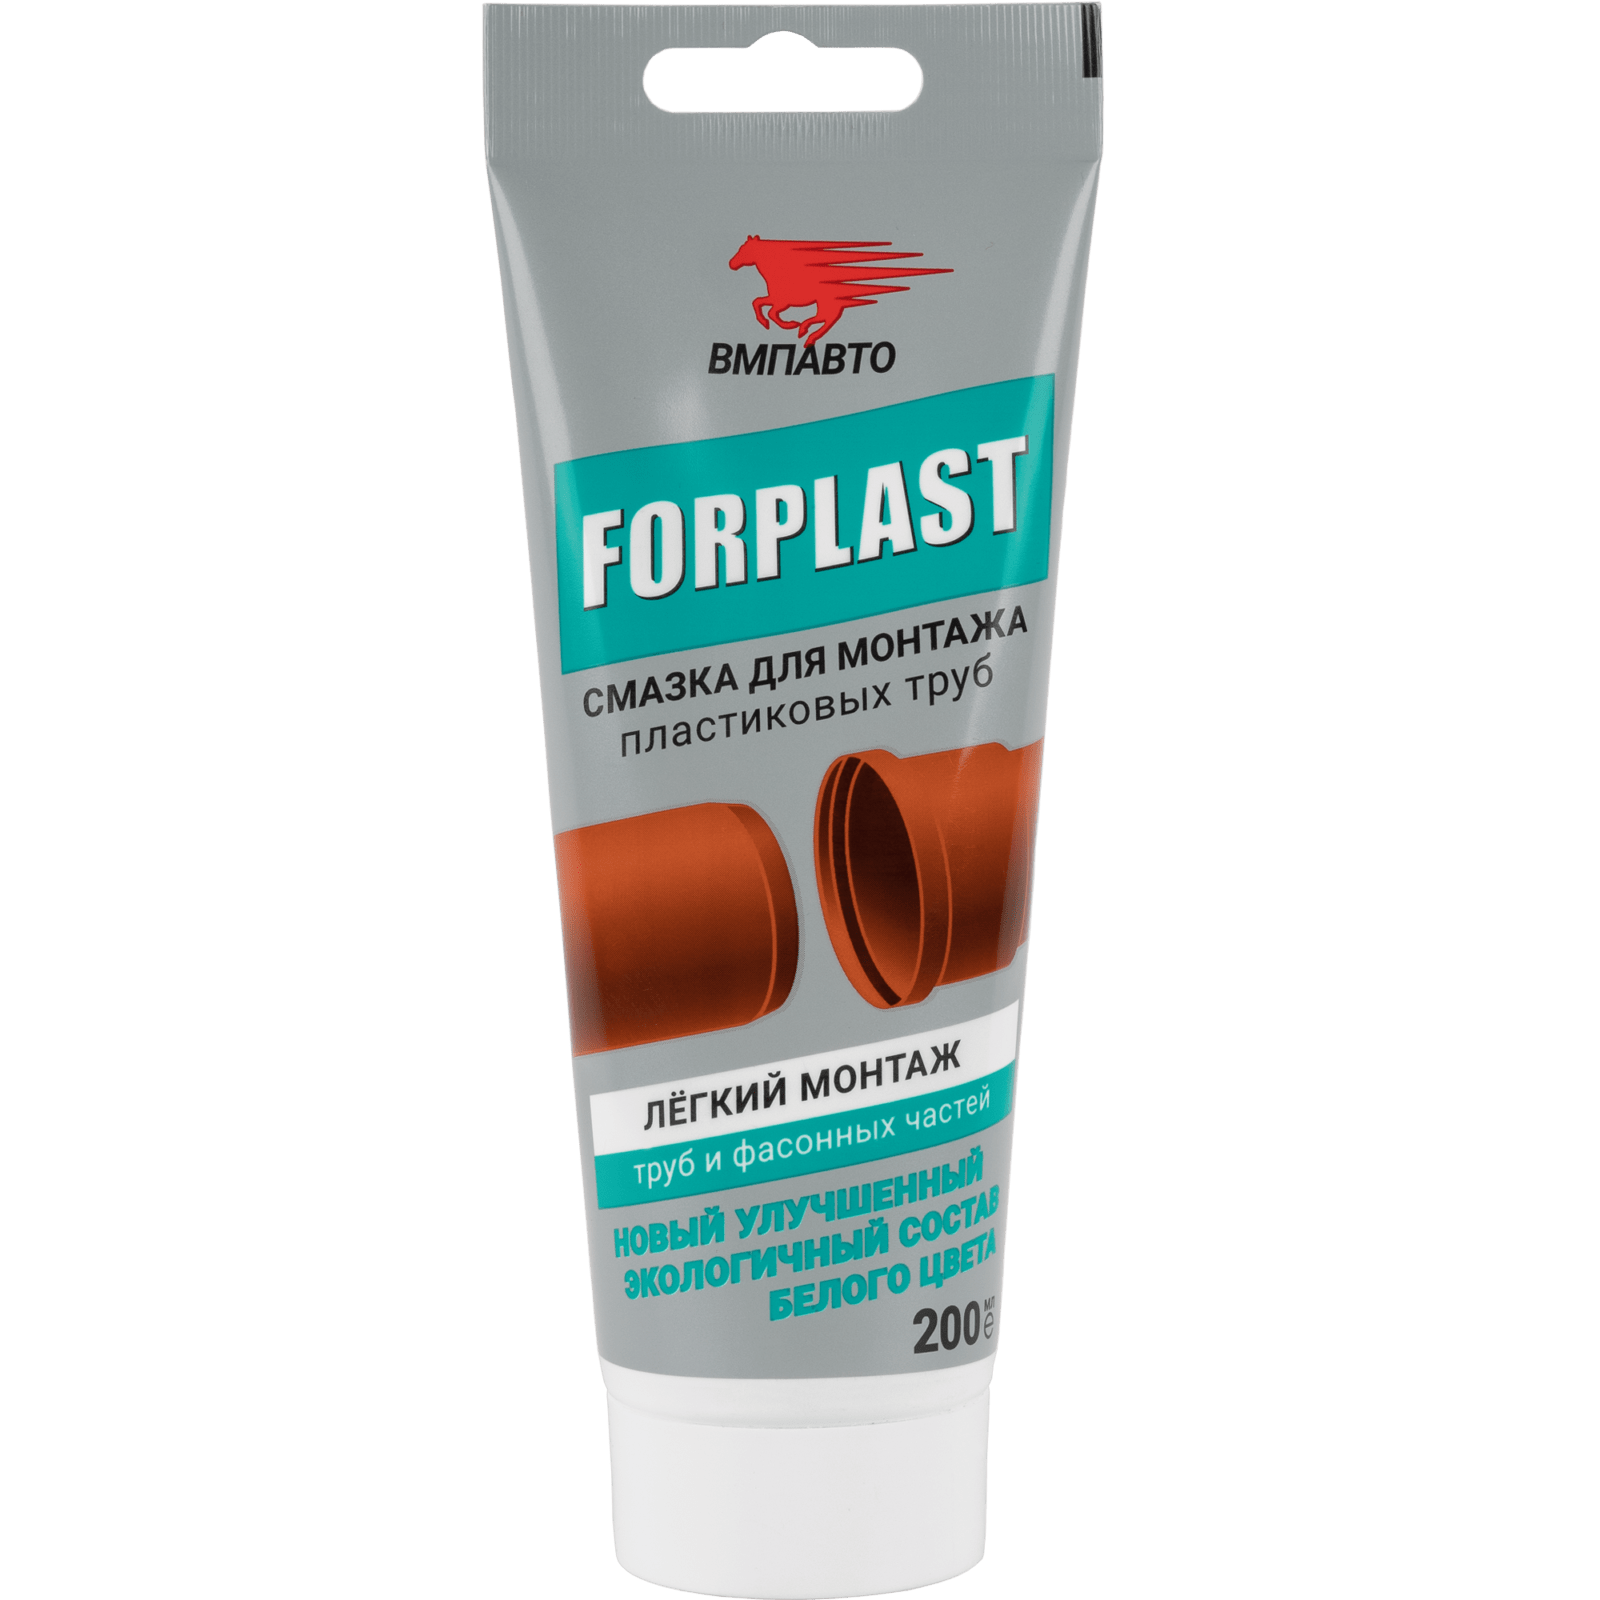 forplast-new-1.png